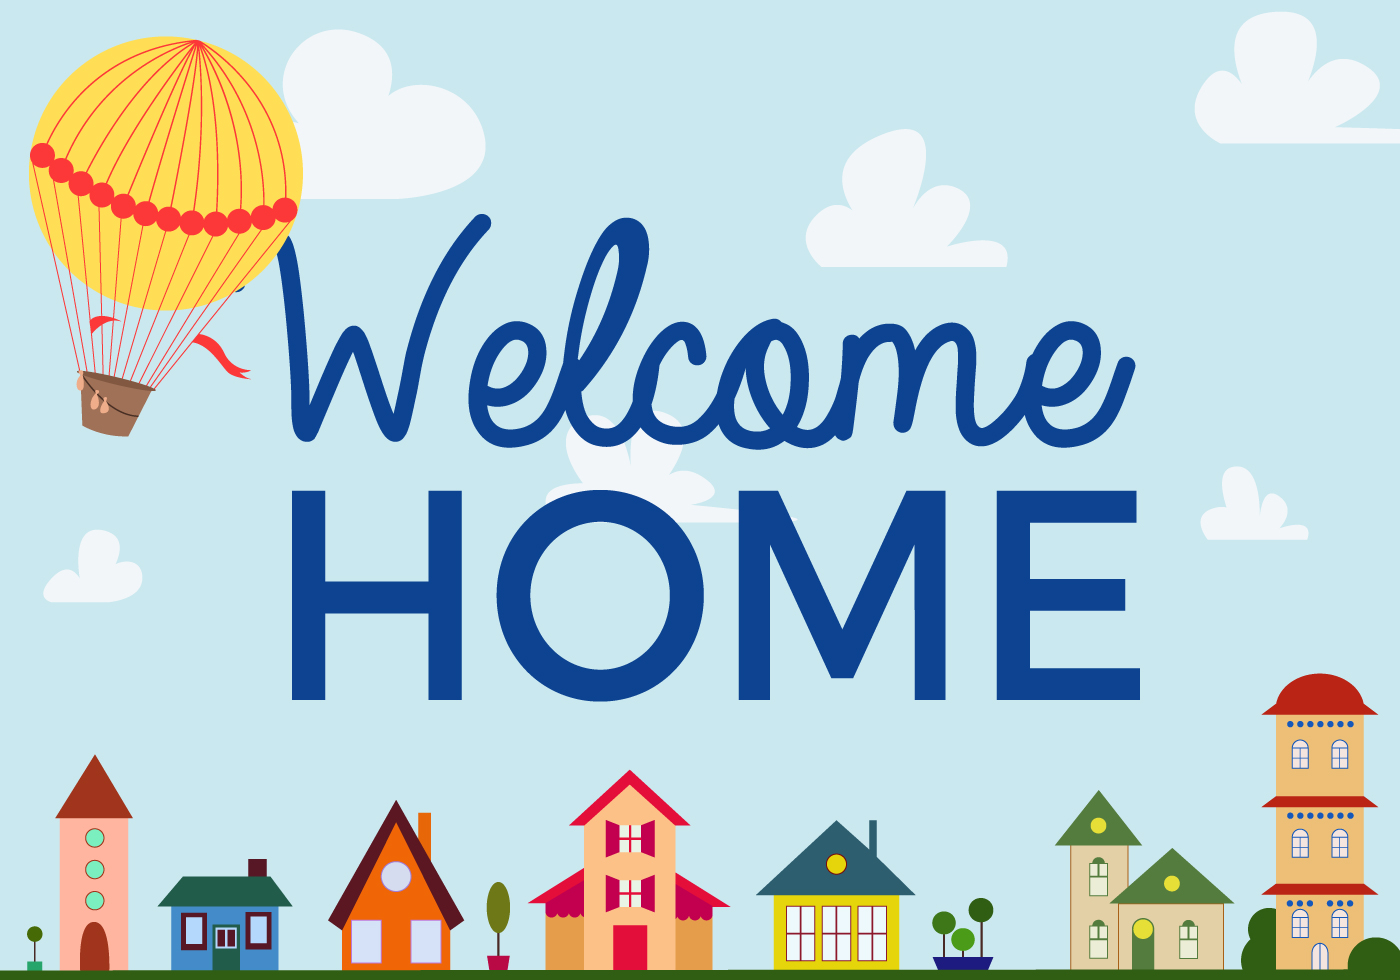 Free Welcome Home Vector - Download Free Vector Art, Stock ...